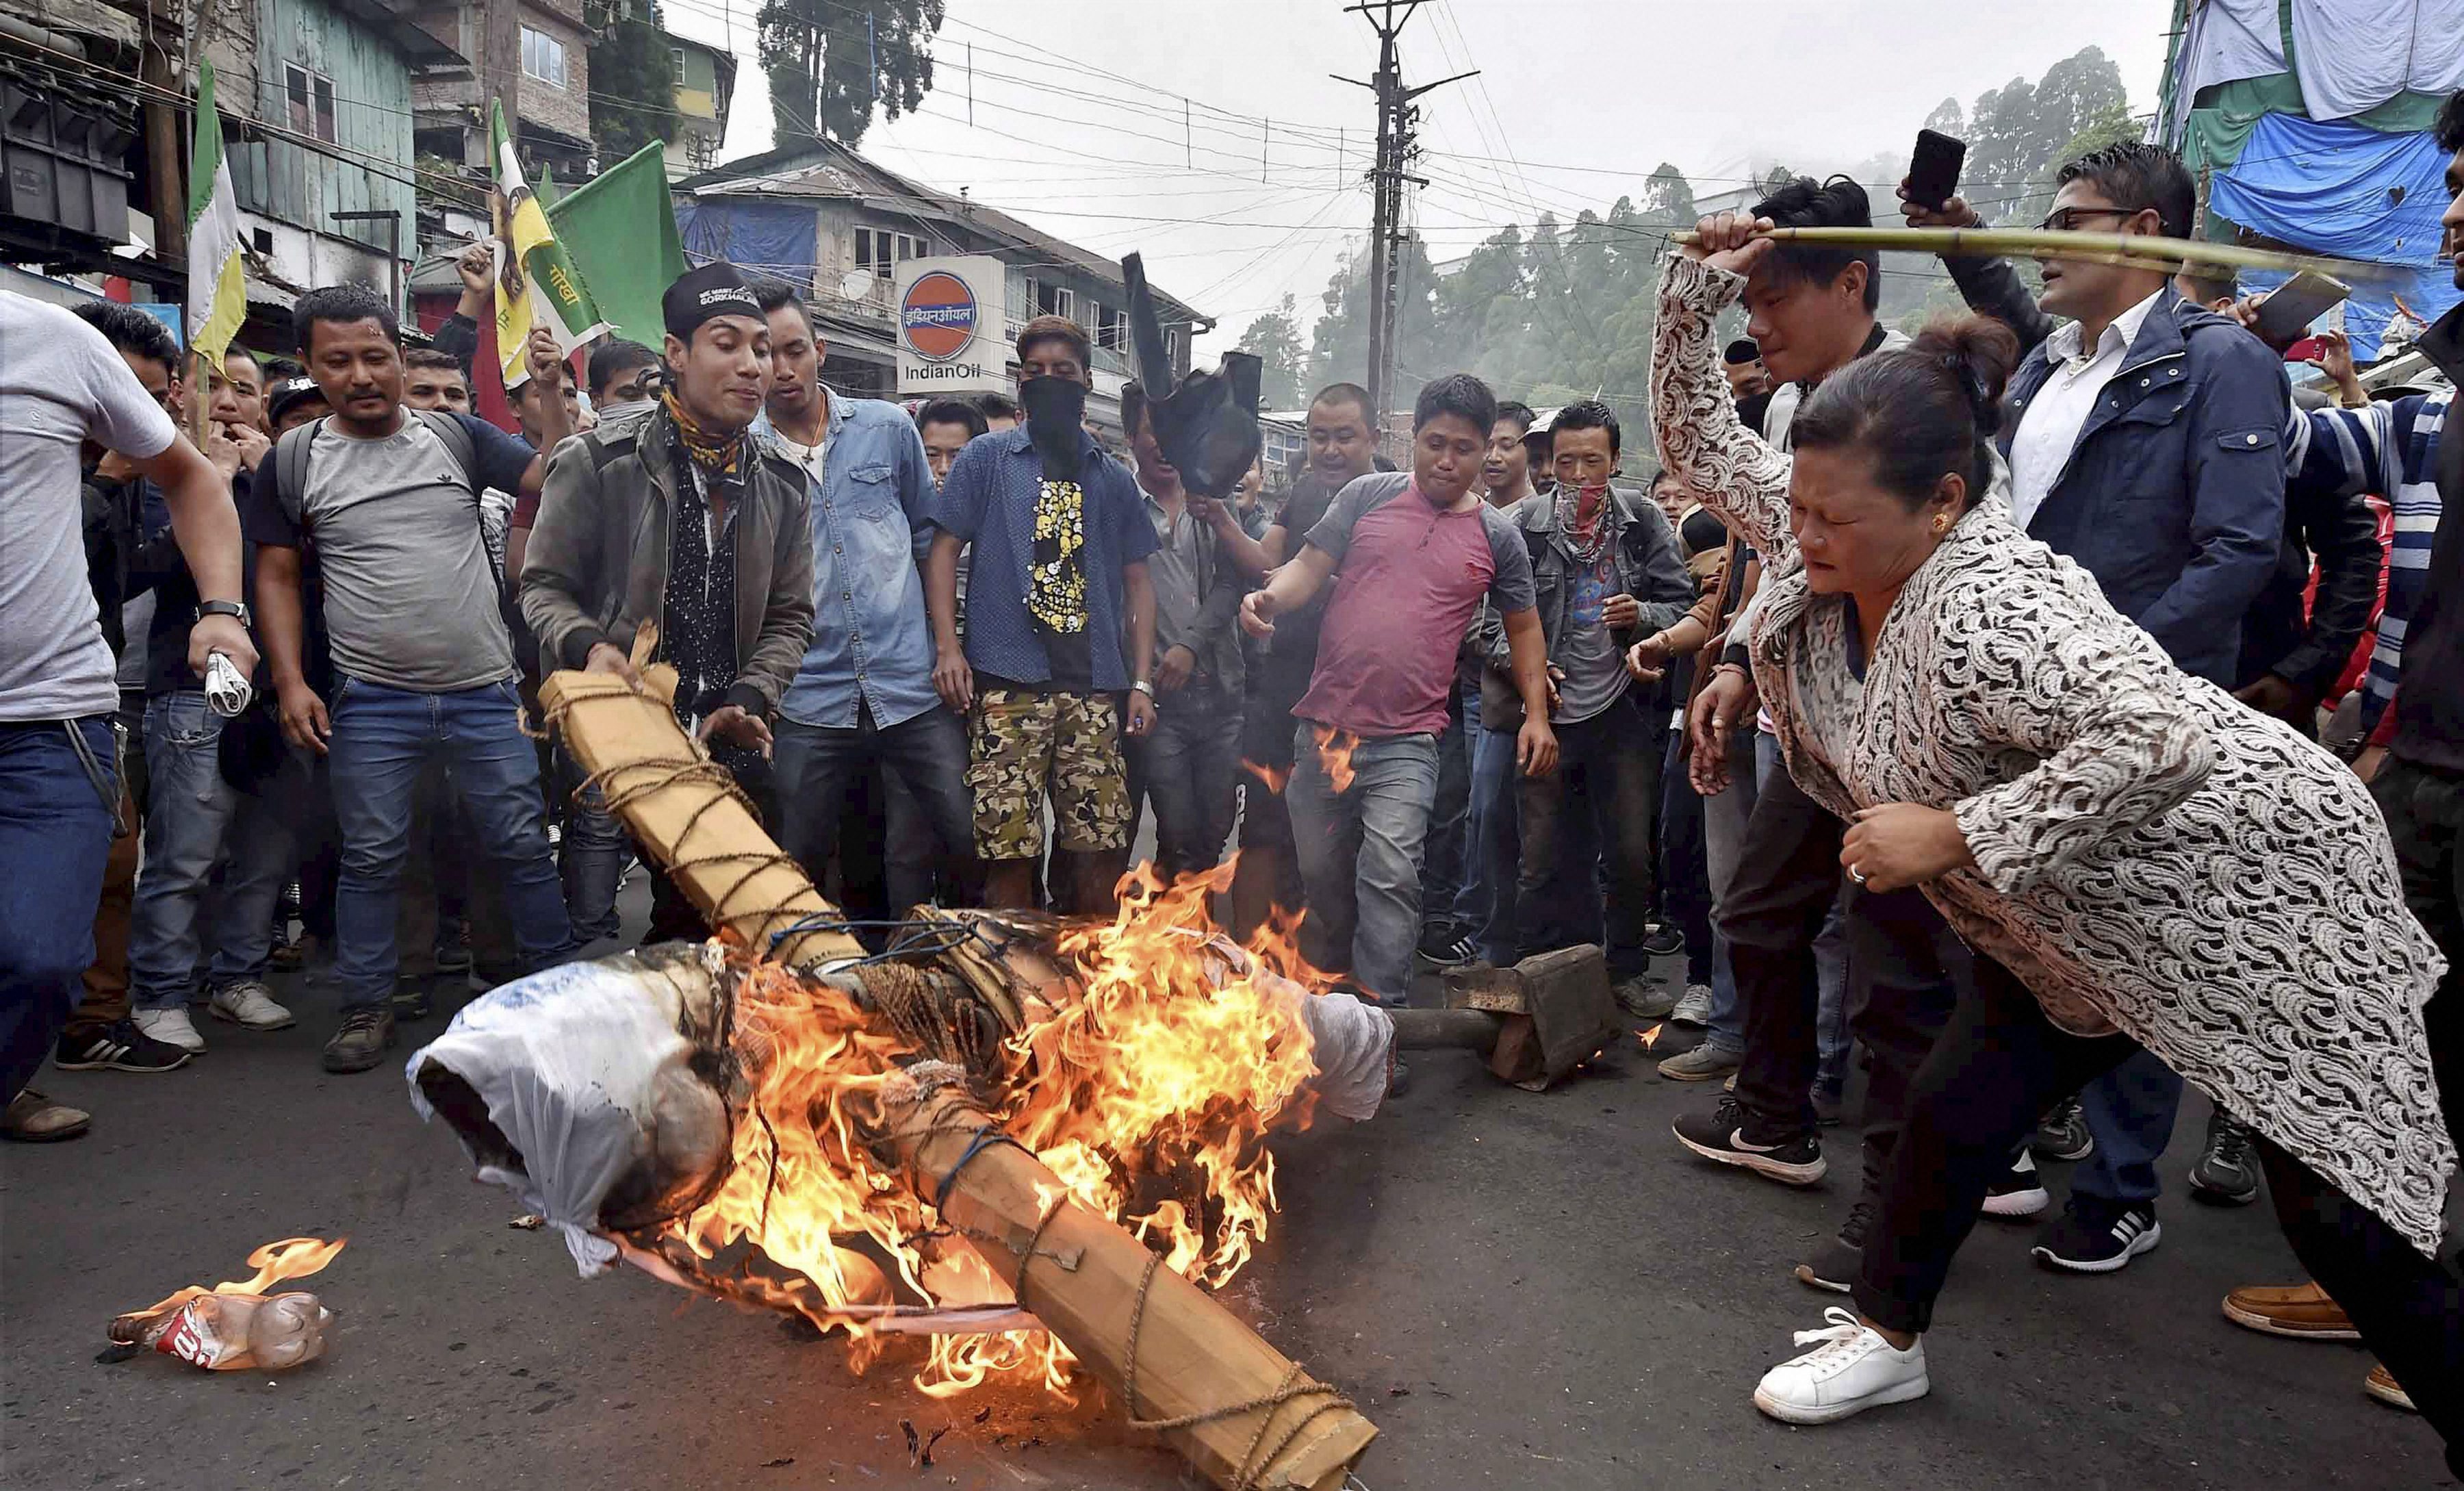 Internet remains suspended in Darjeeling, GJM workers take out protest march